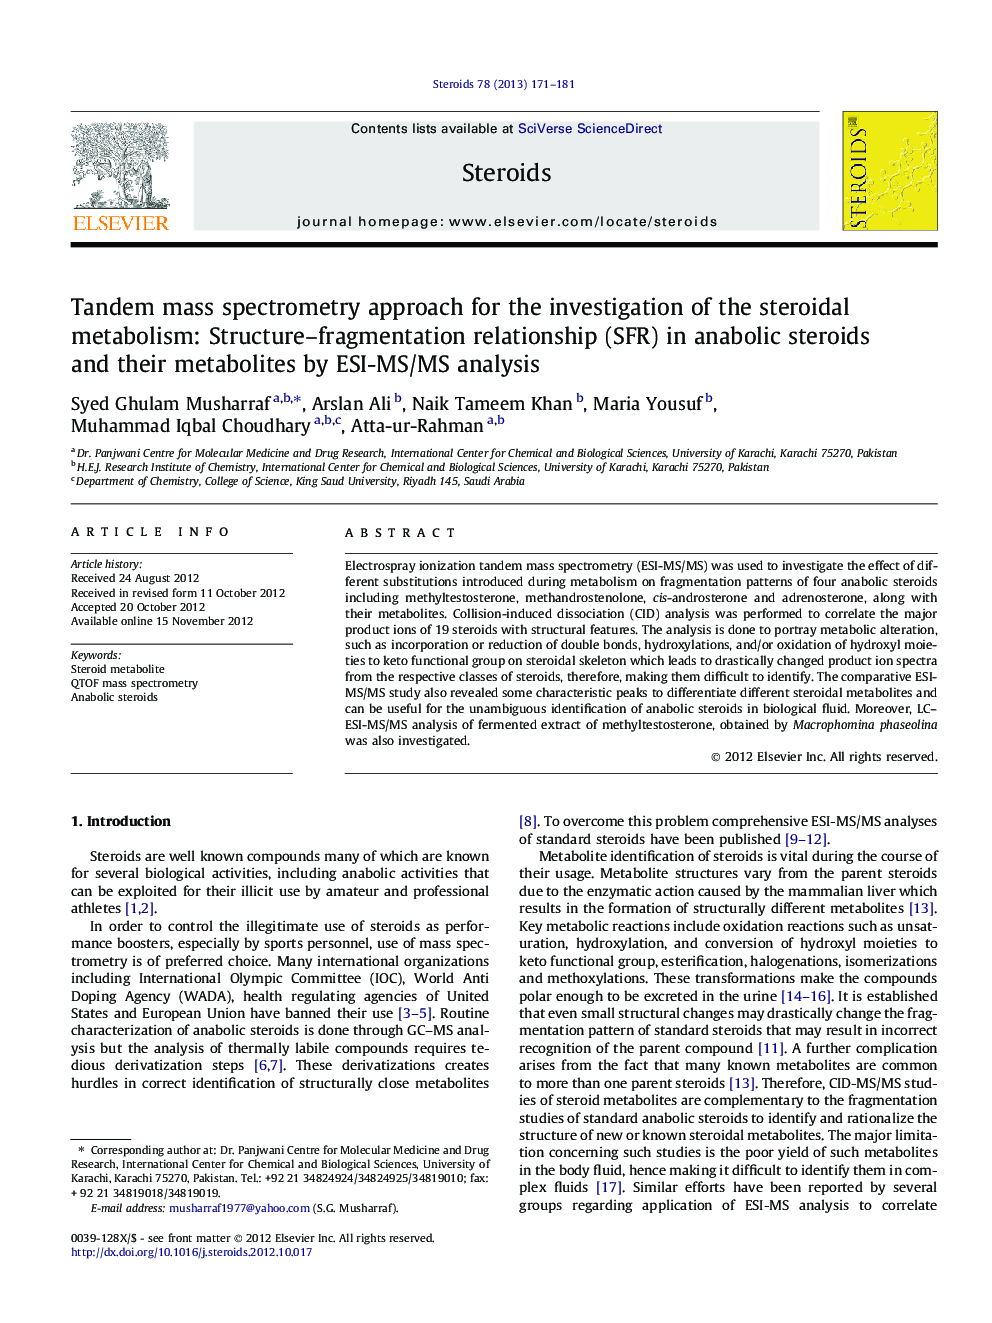 Tandem mass spectrometry approach for the investigation of the steroidal metabolism: Structure-fragmentation relationship (SFR) in anabolic steroids and their metabolites by ESI-MS/MS analysis